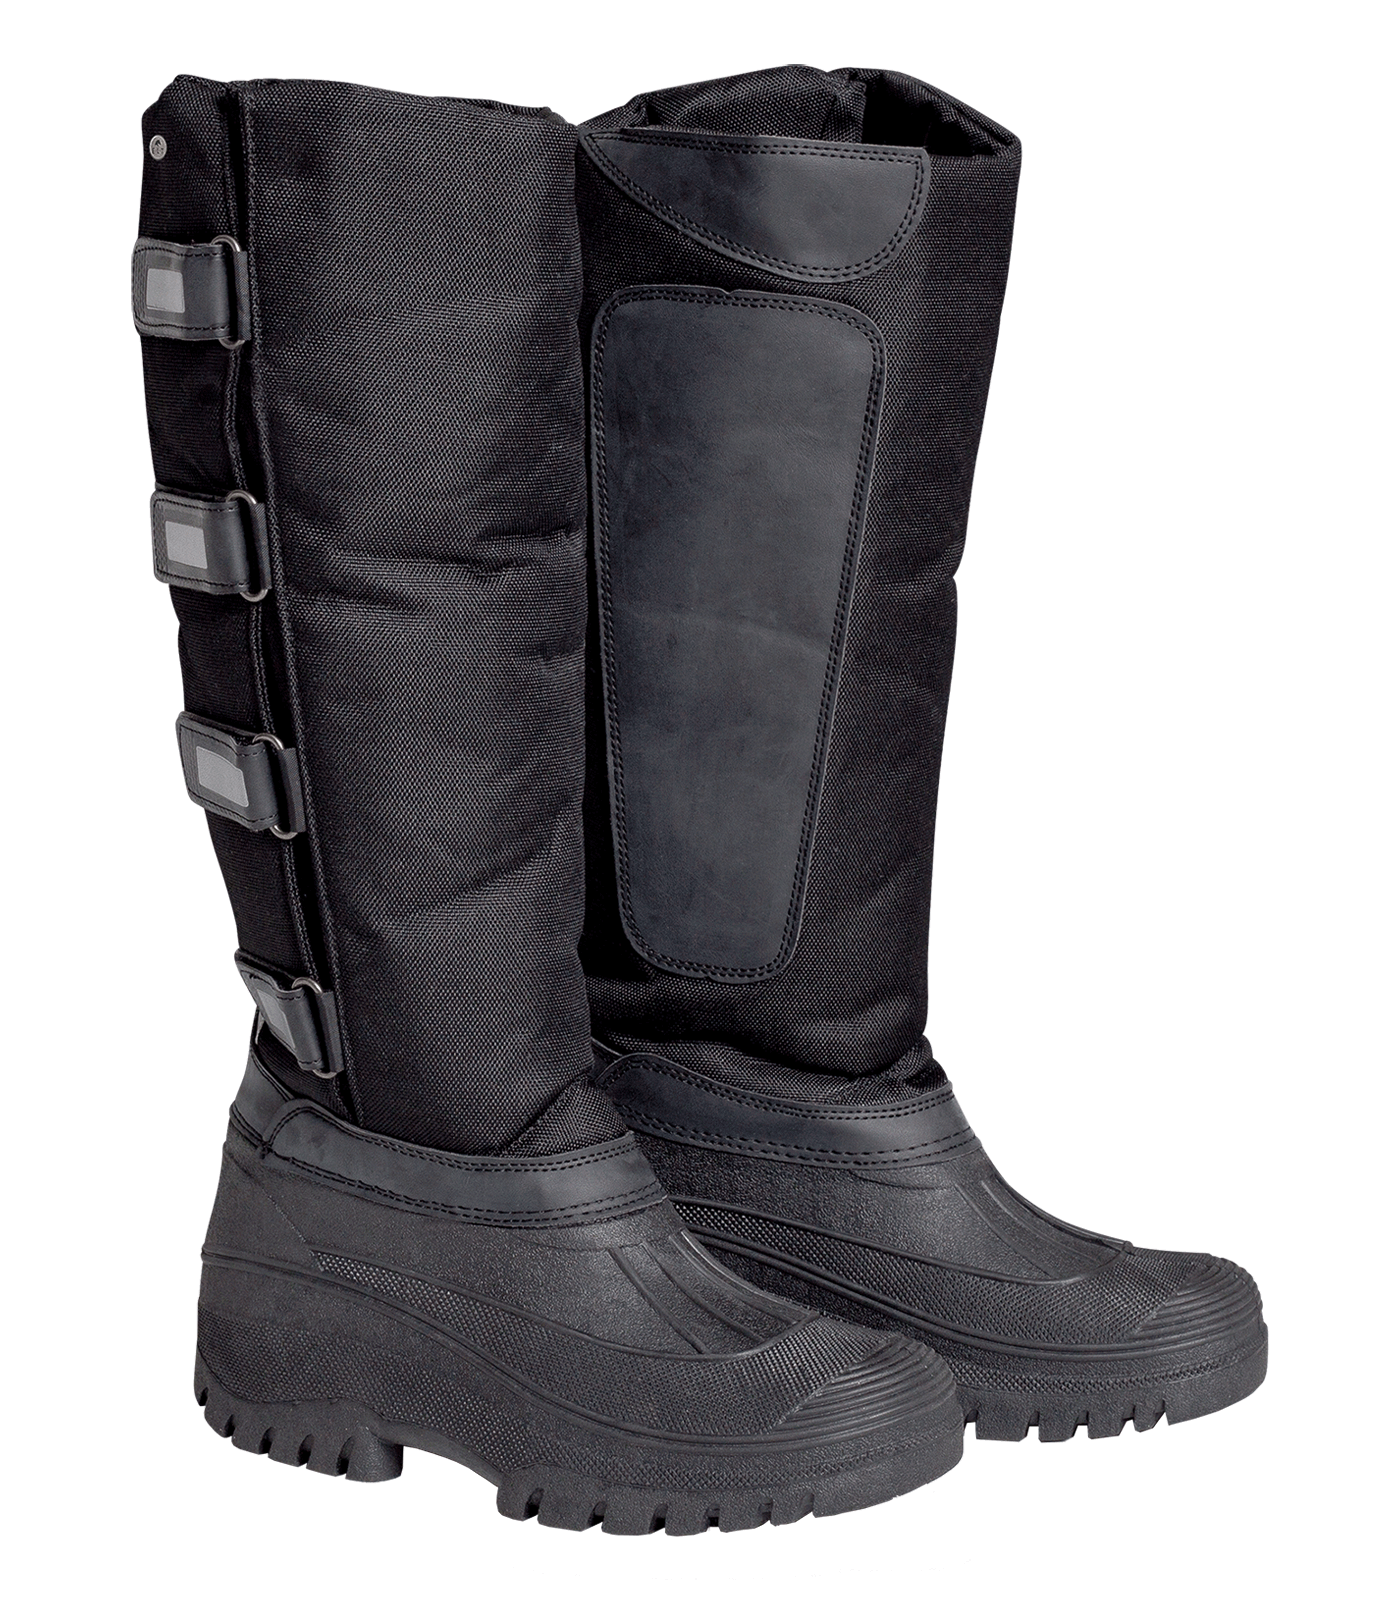 Standard Thermal Boots black